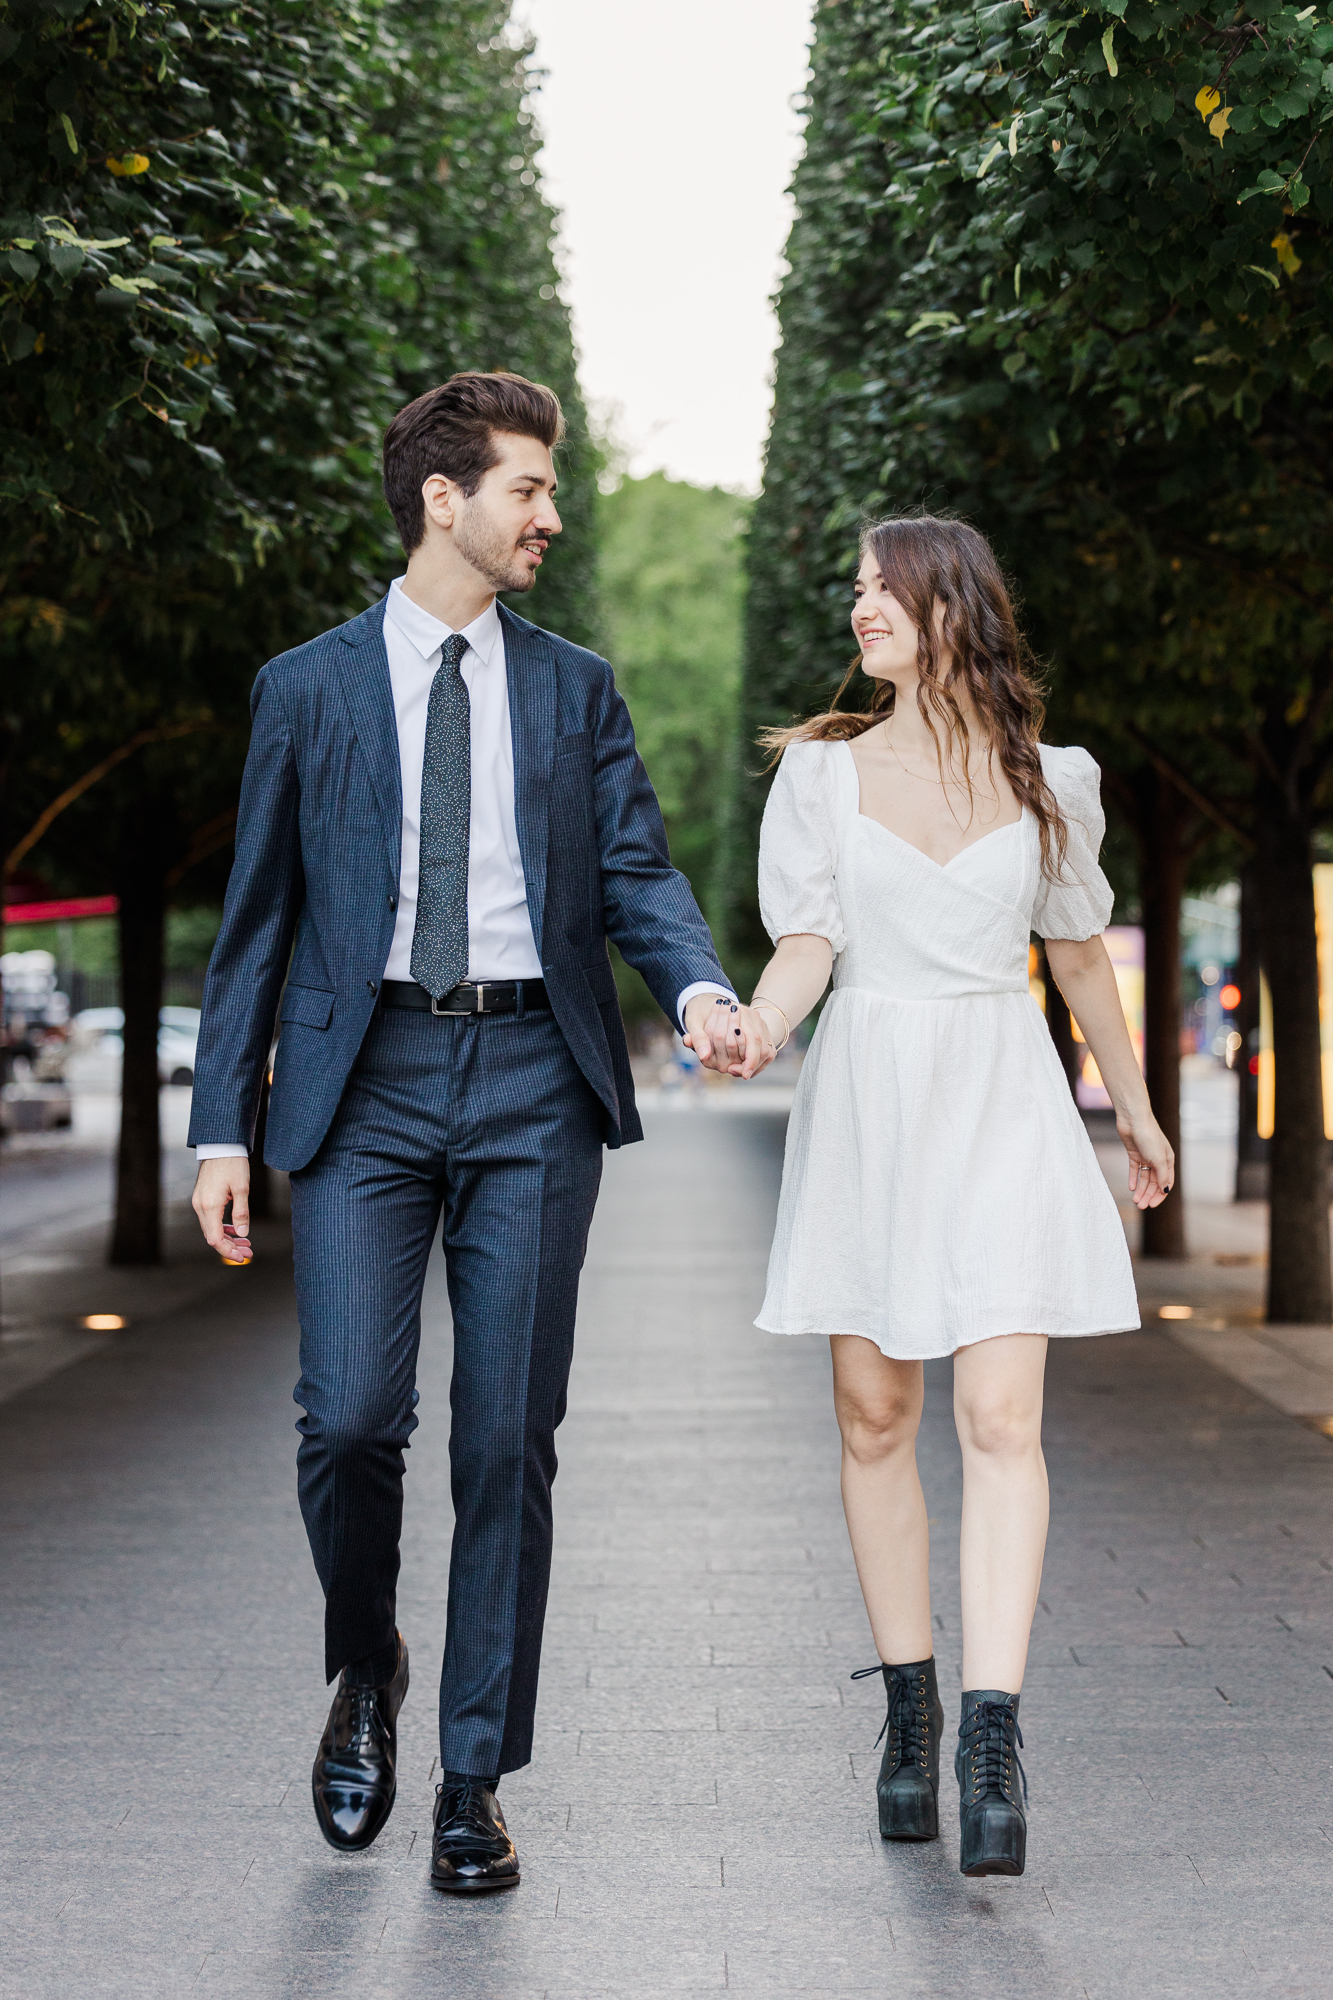 Magical New York engagement photography